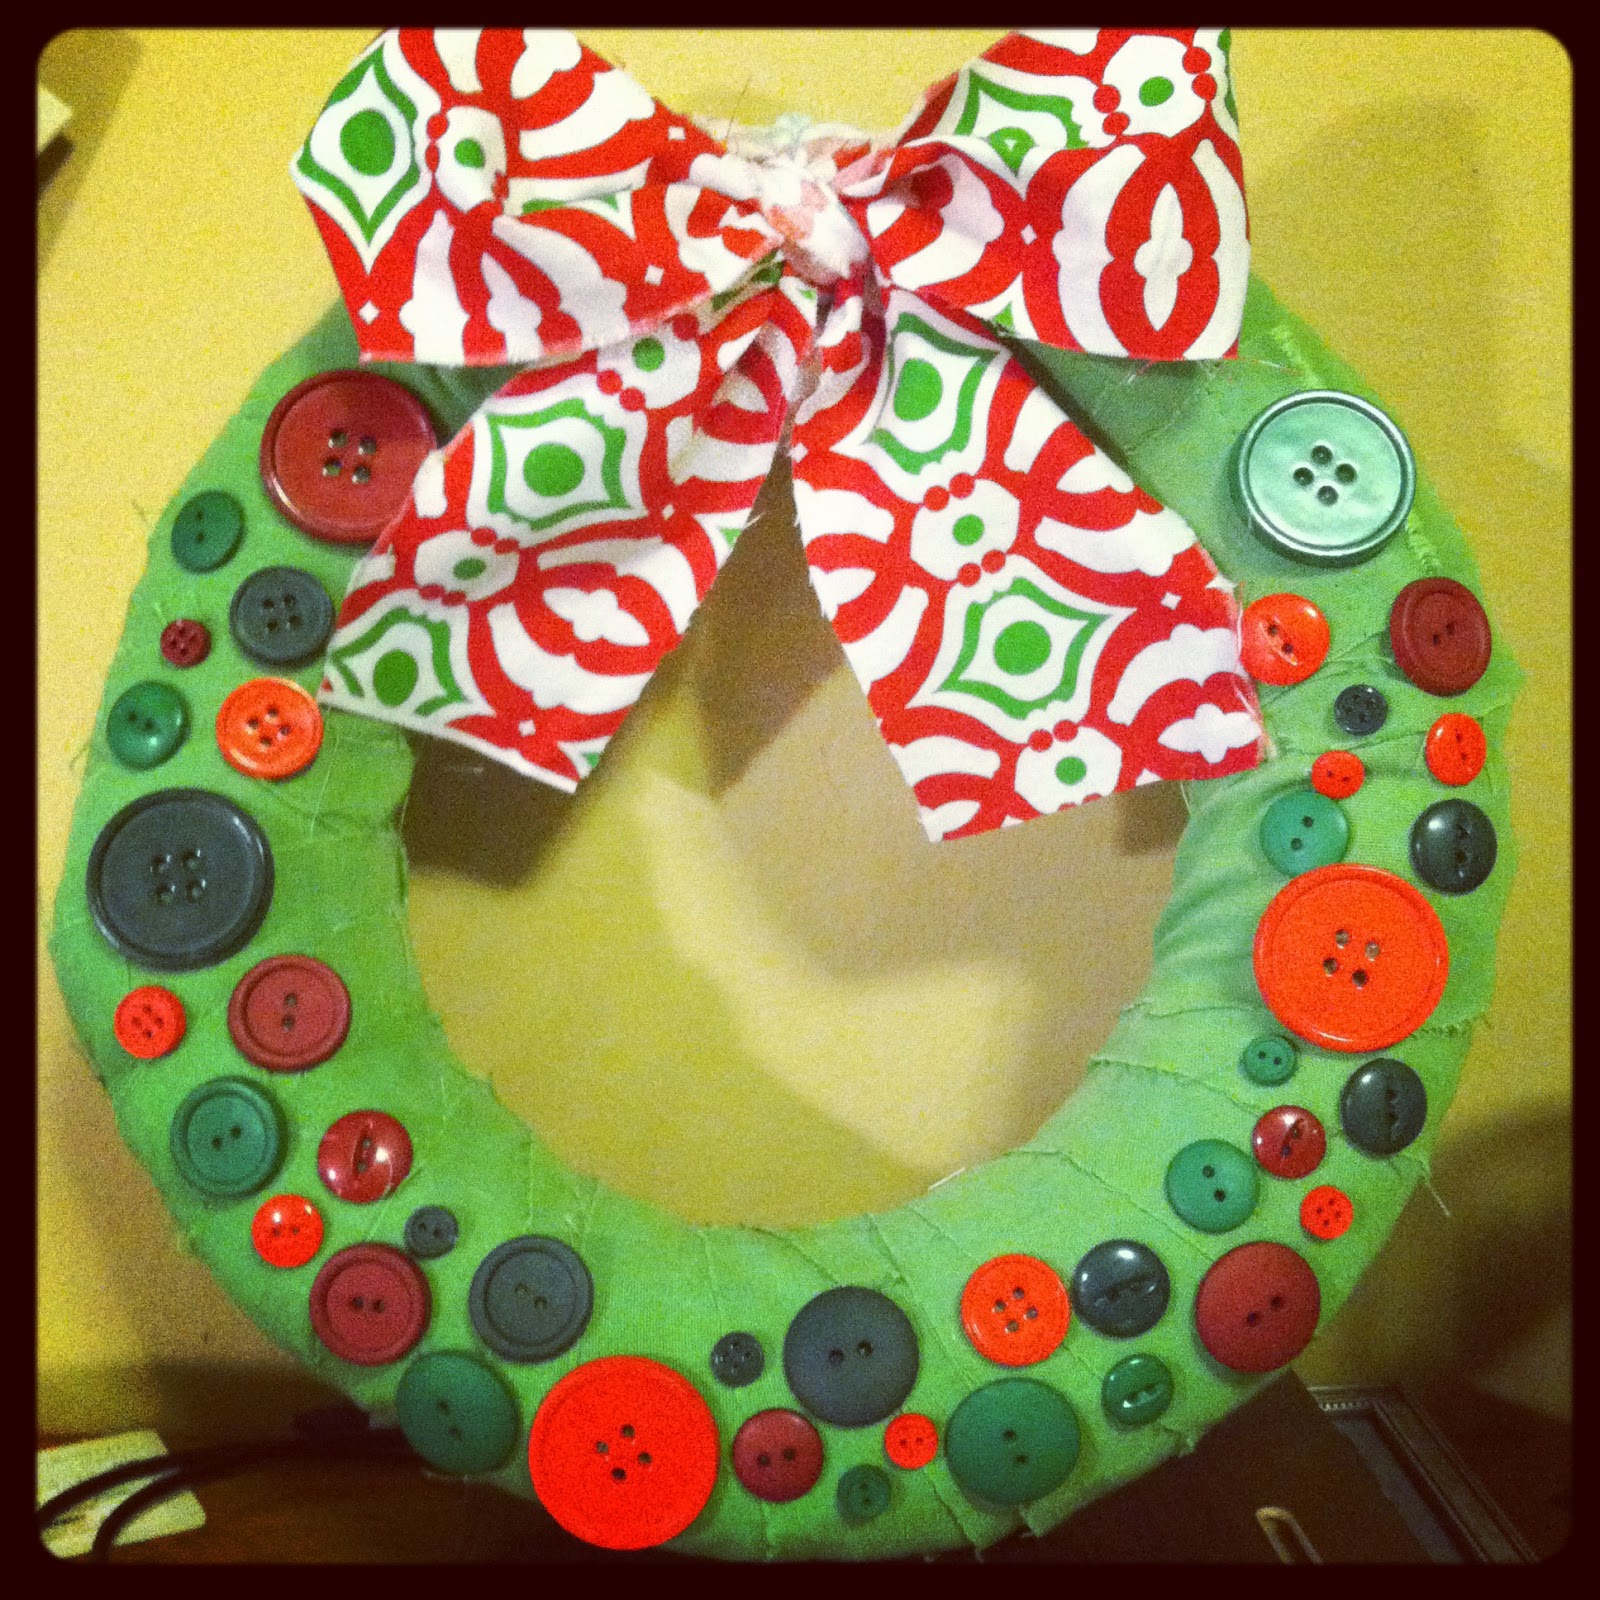 Makin' it in Memphis: {Craft this}: Christmas button wreath.